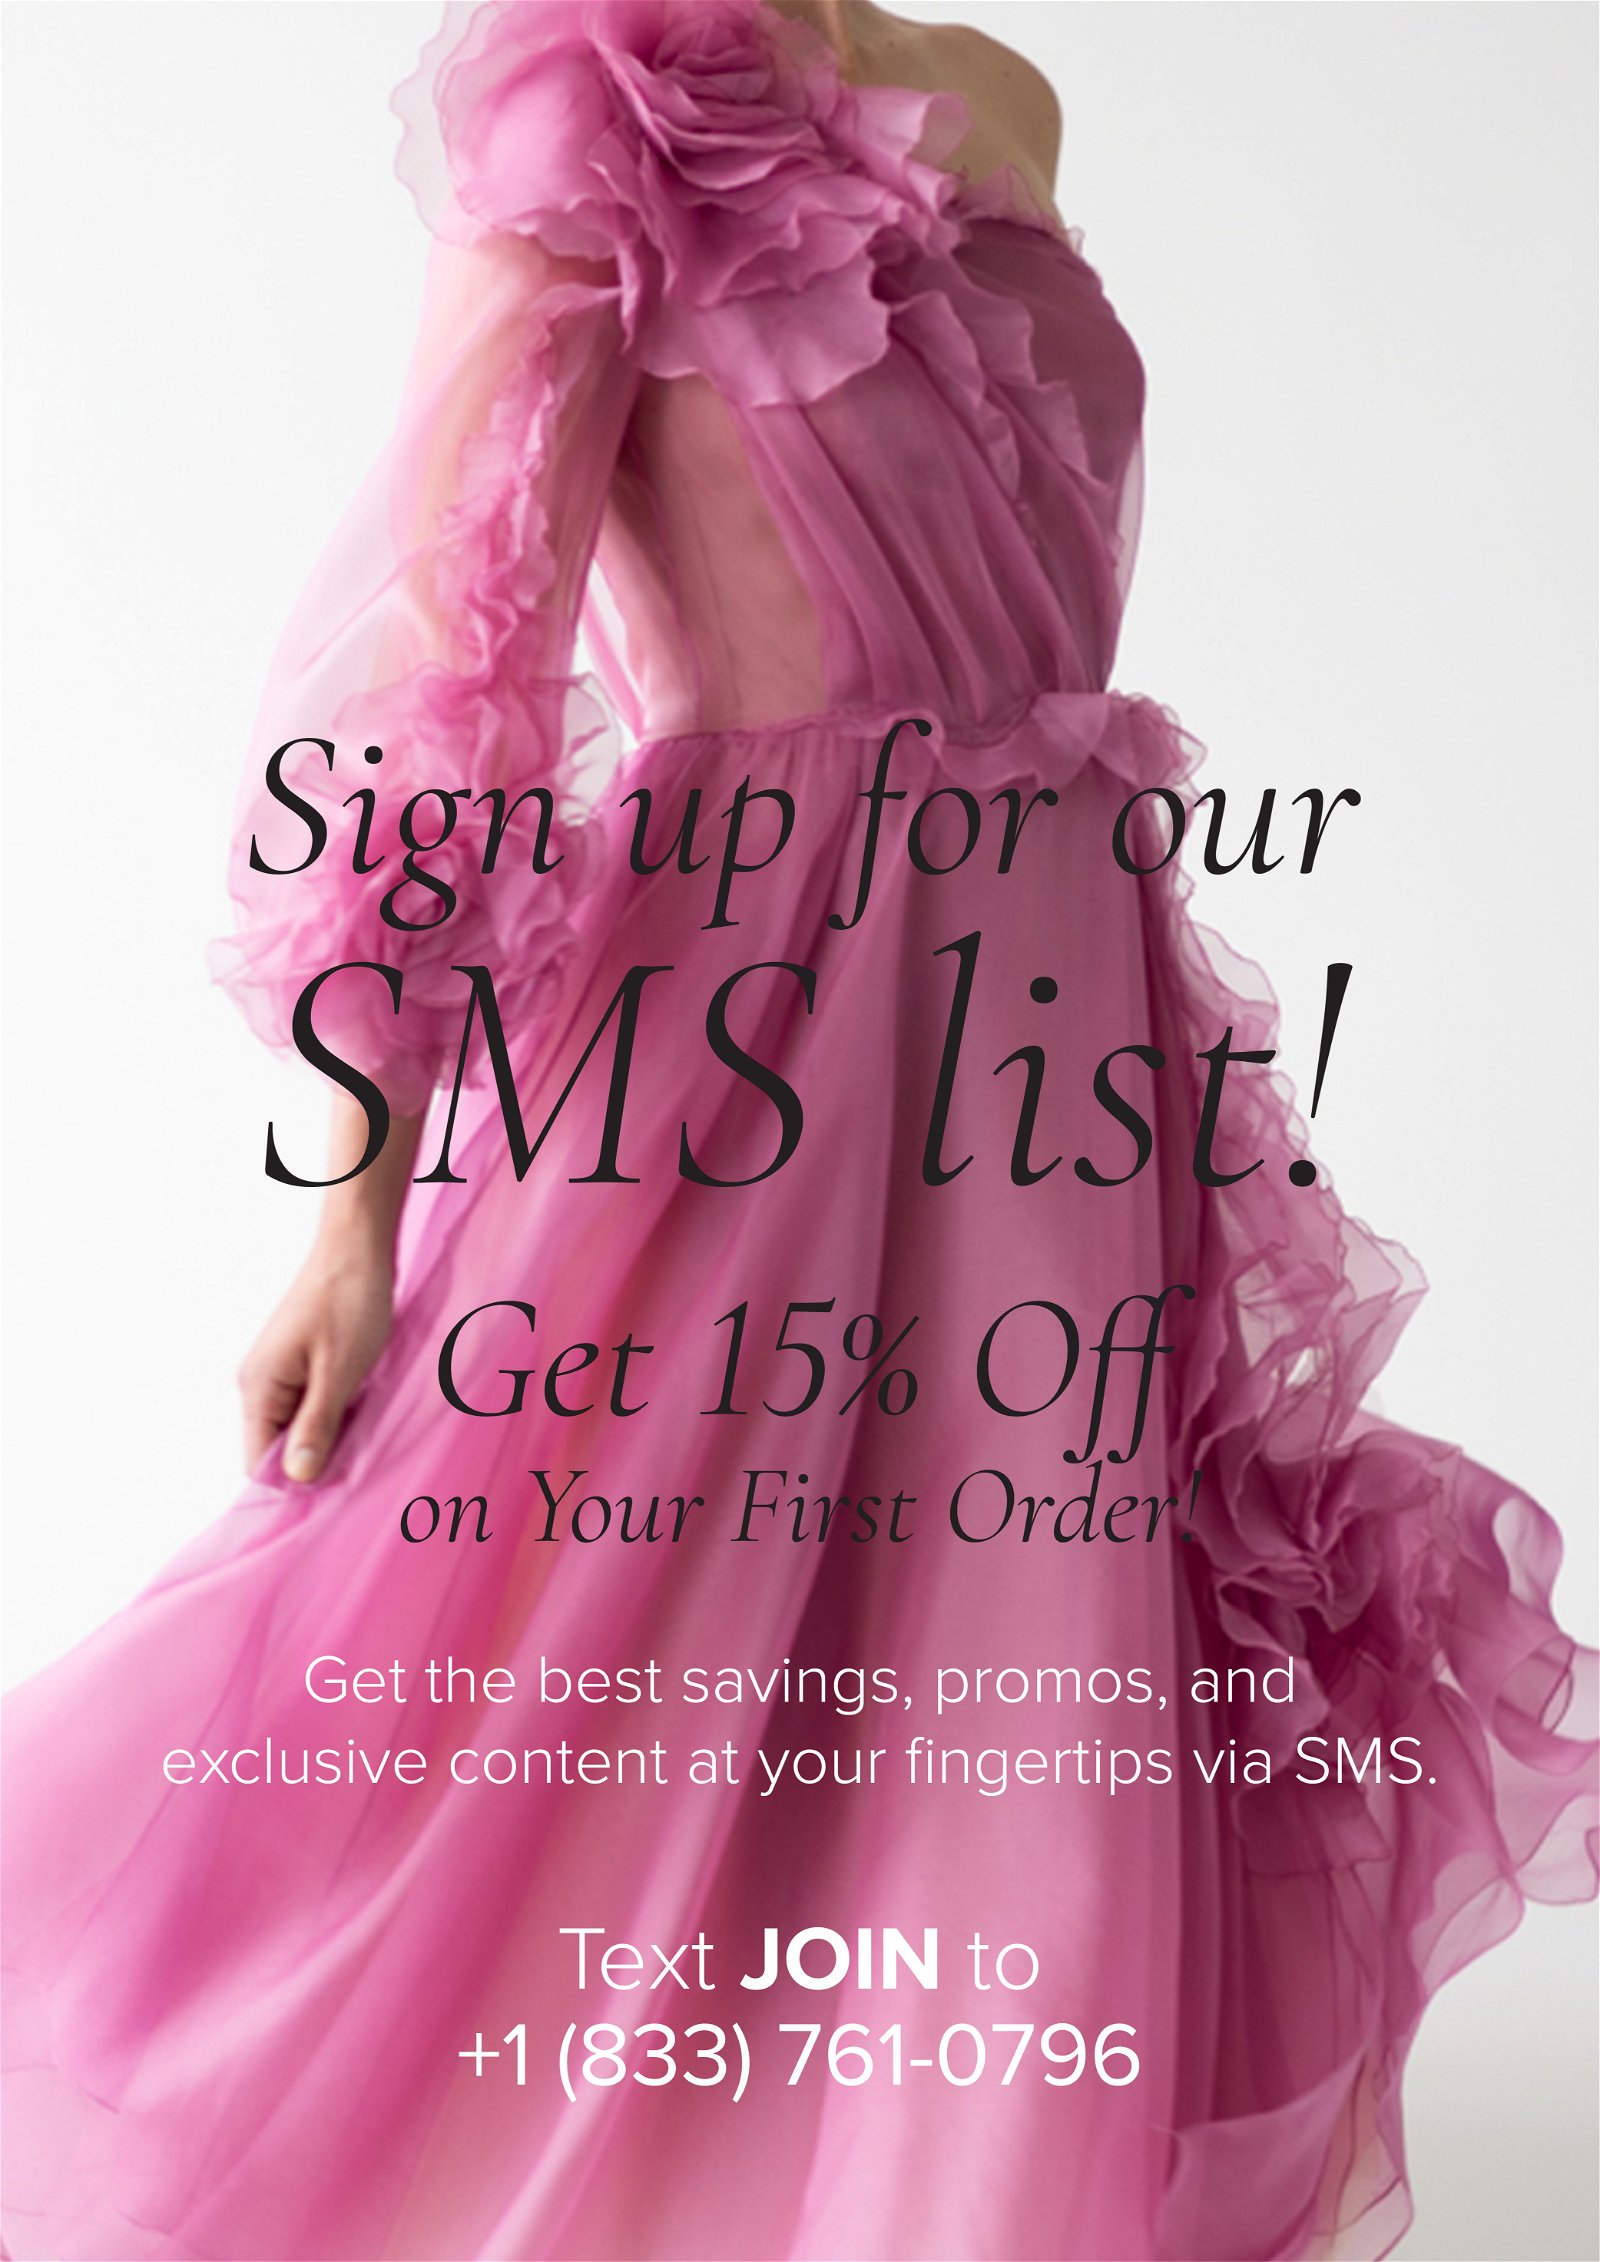 Get 15% off on your first order